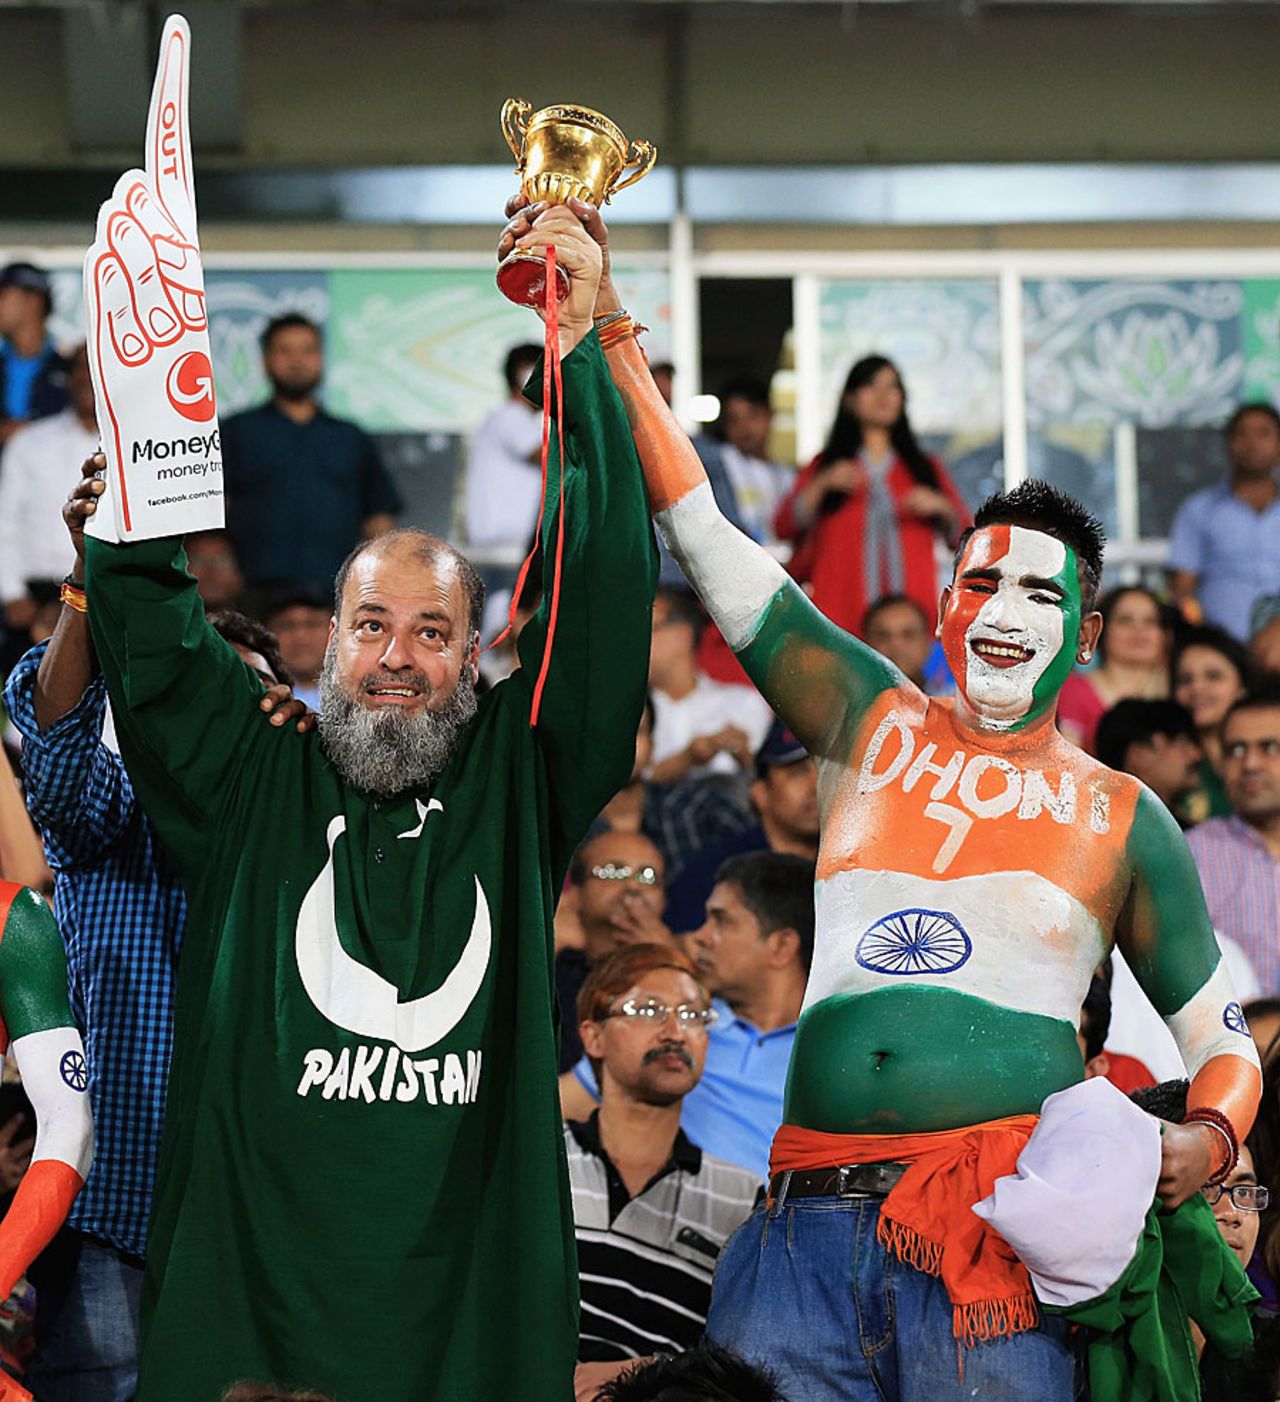 Rivalry on the pitch, friendliness in the stands, as two fans demonstrate, India v Pakistan, World T20, Group 2, Mirpur, March 21, 2014 